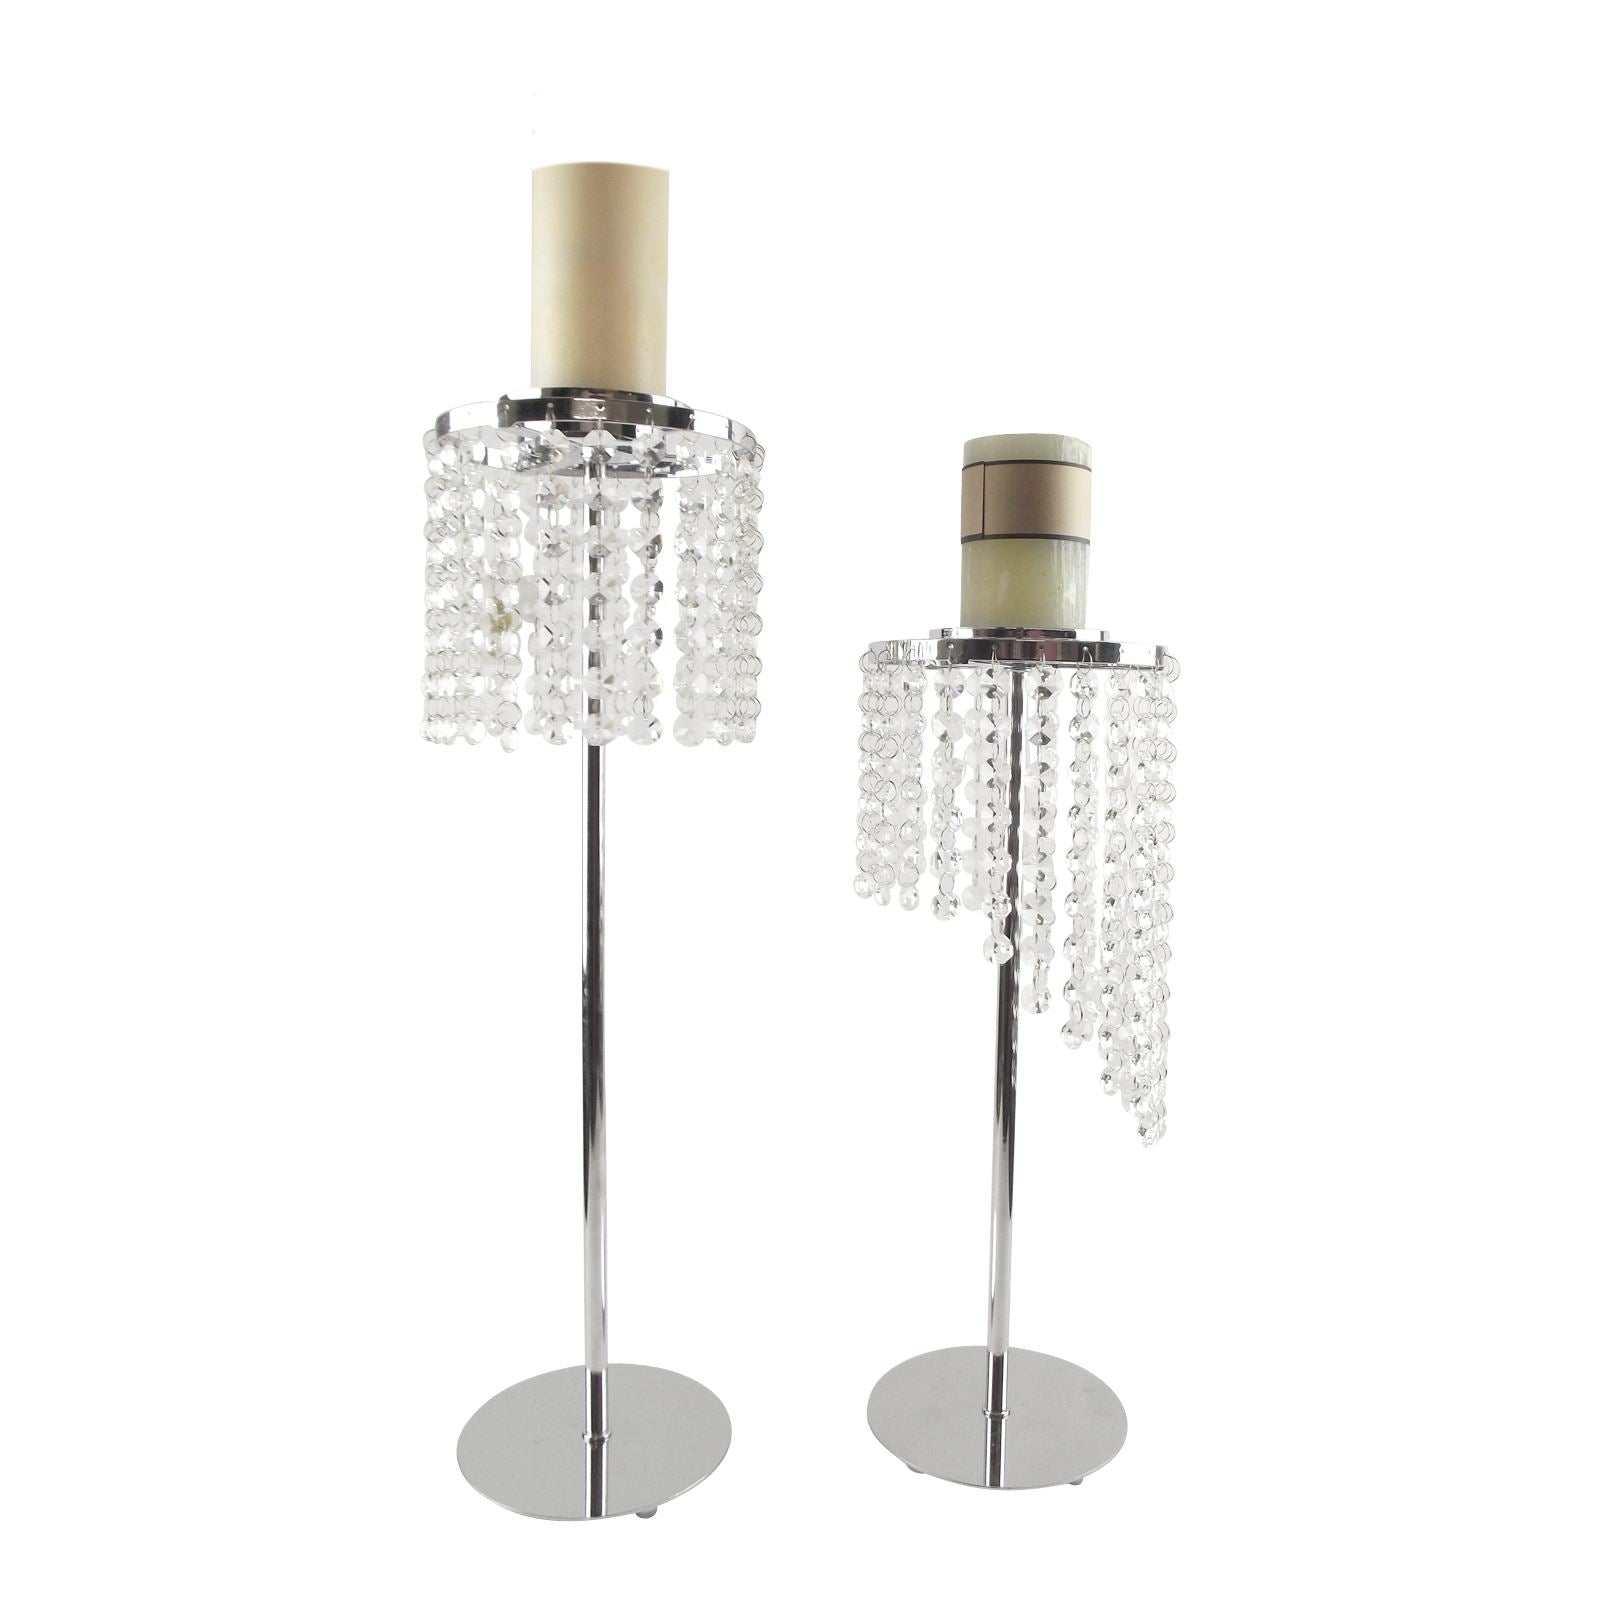 Tall Chrome Candle Holders with Crystal Garland